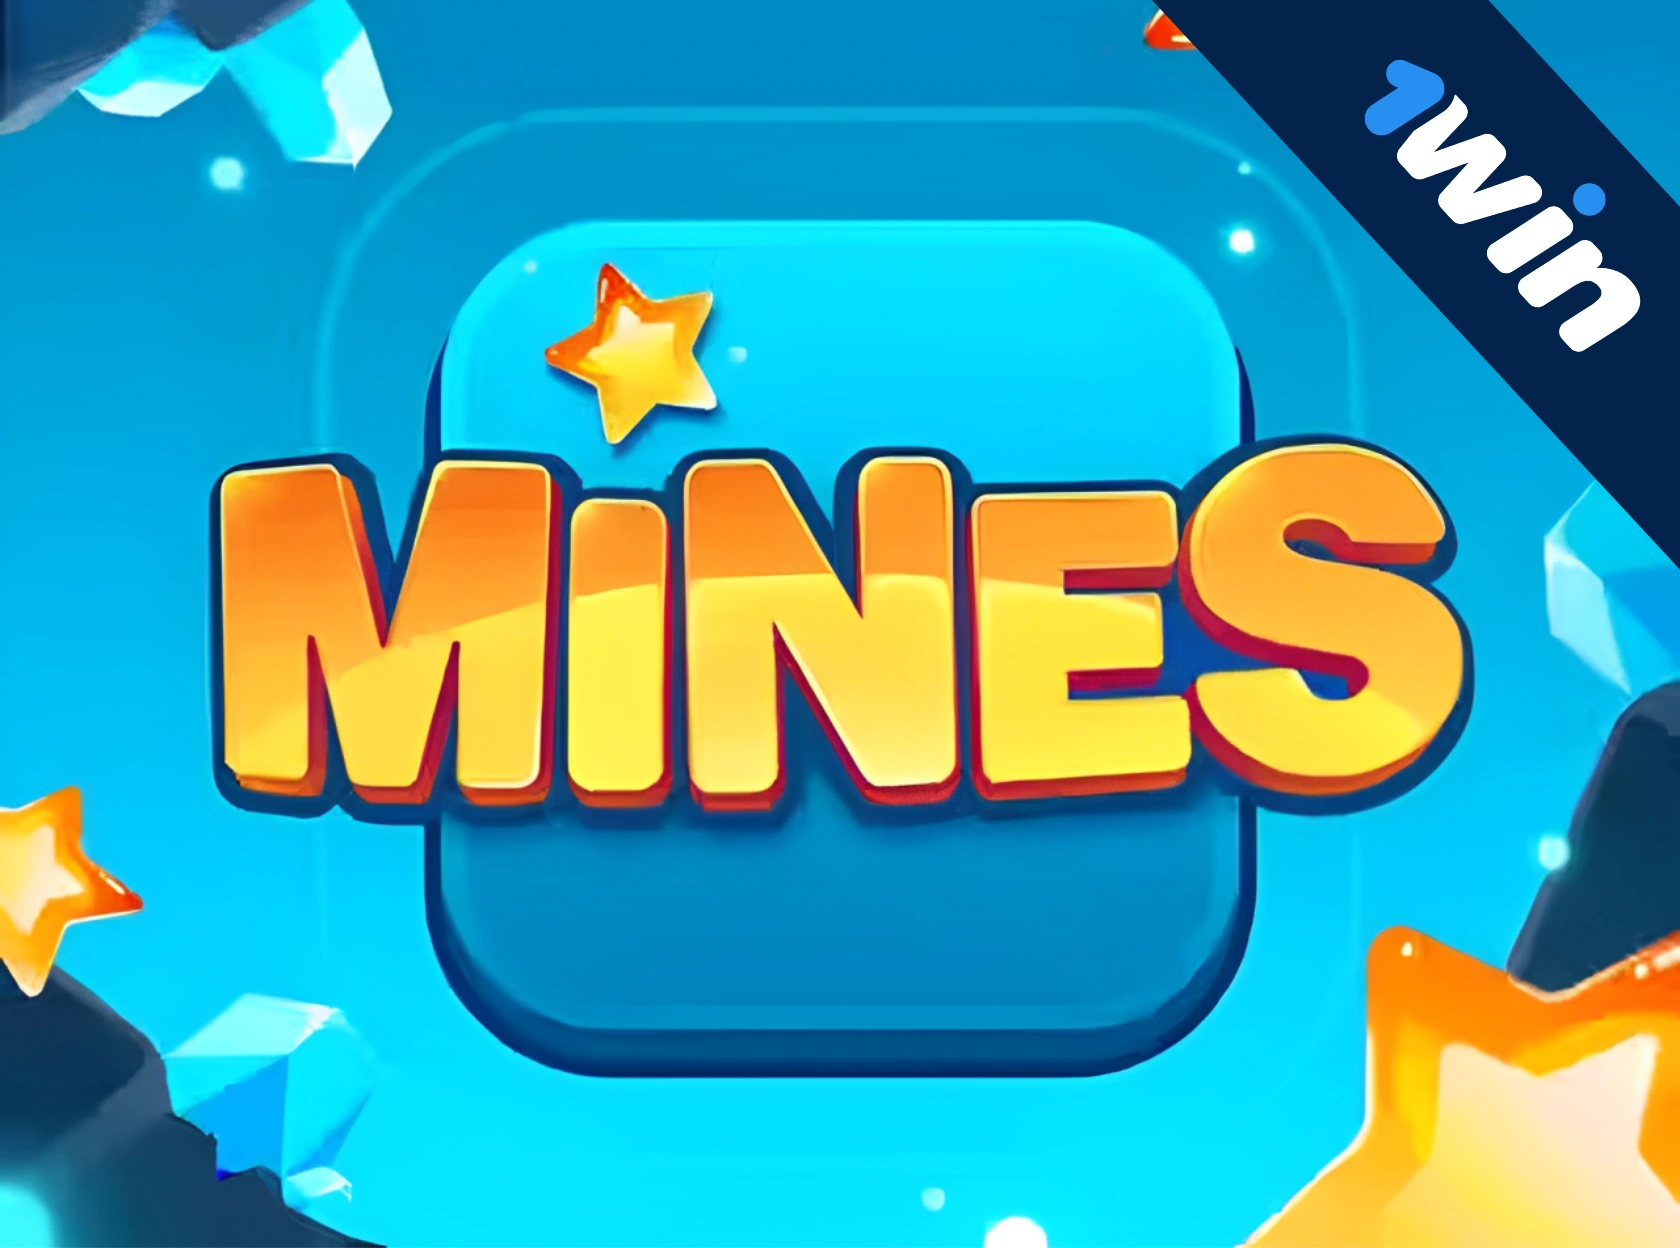 1win Mines - play Minesweeper for money!